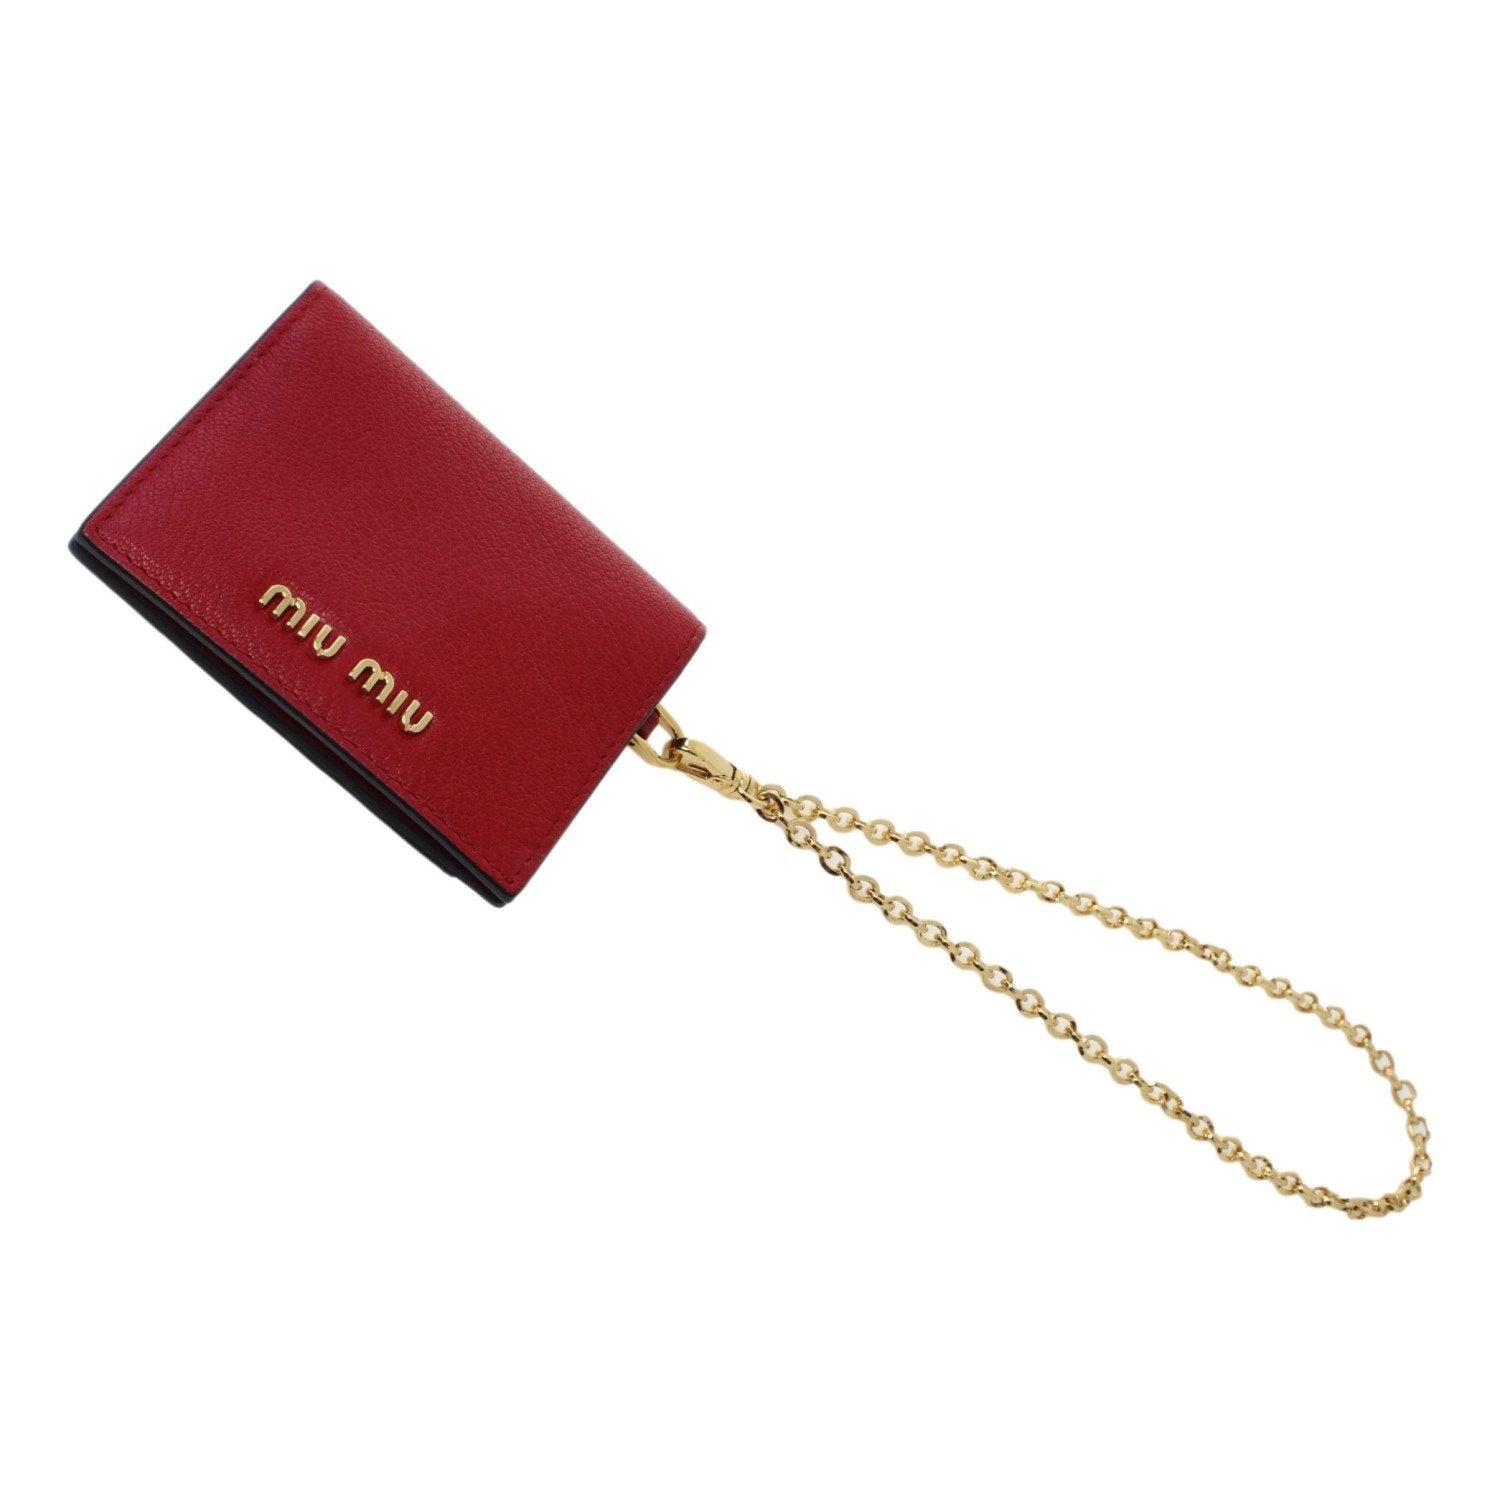 Miu Miu Fuoco Red Leather Credit Card Holder Wallet Madras Chain 5MC320 at_Queen_Bee_of_Beverly_Hills